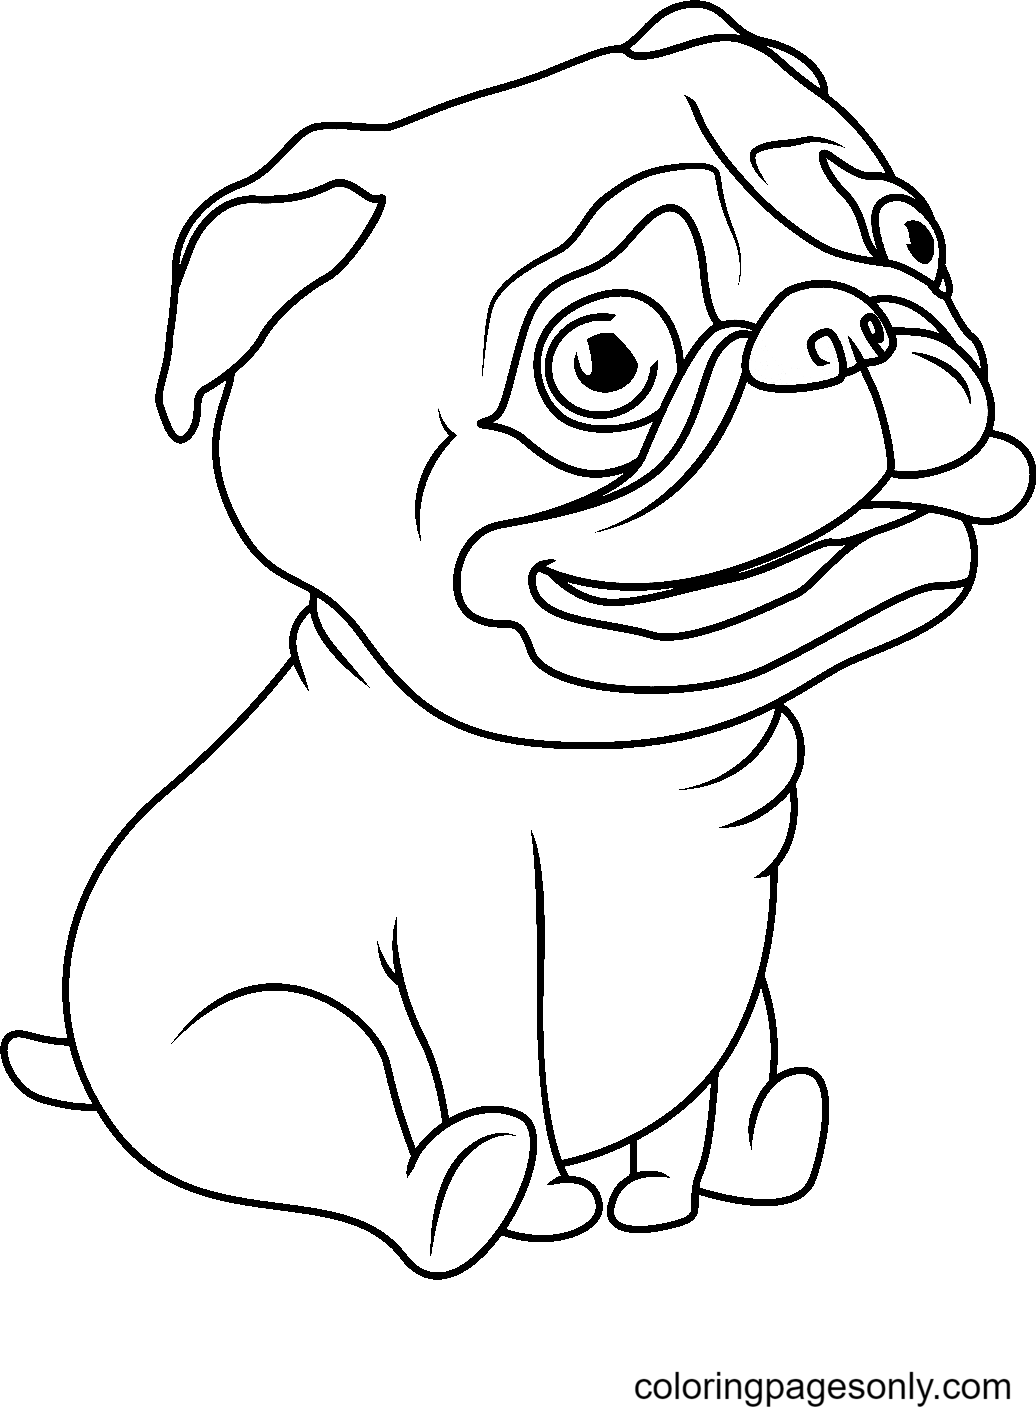 Pug Coloring Pages Printable for Free Download